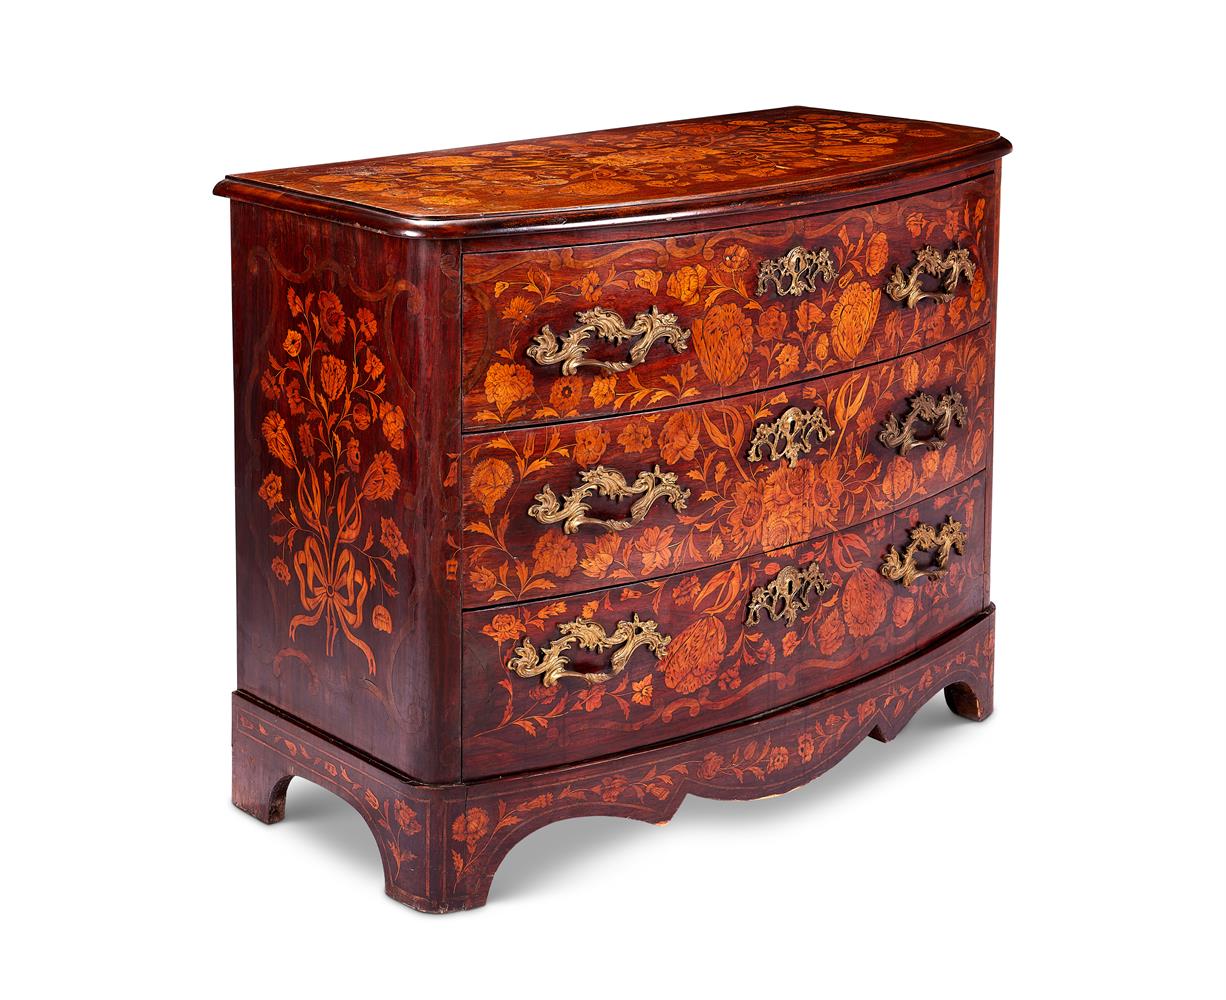 A DUTCH WALNUT AND FLORAL MARQUETRY COMMODE, EARLY 19TH CENTURY - Image 2 of 2